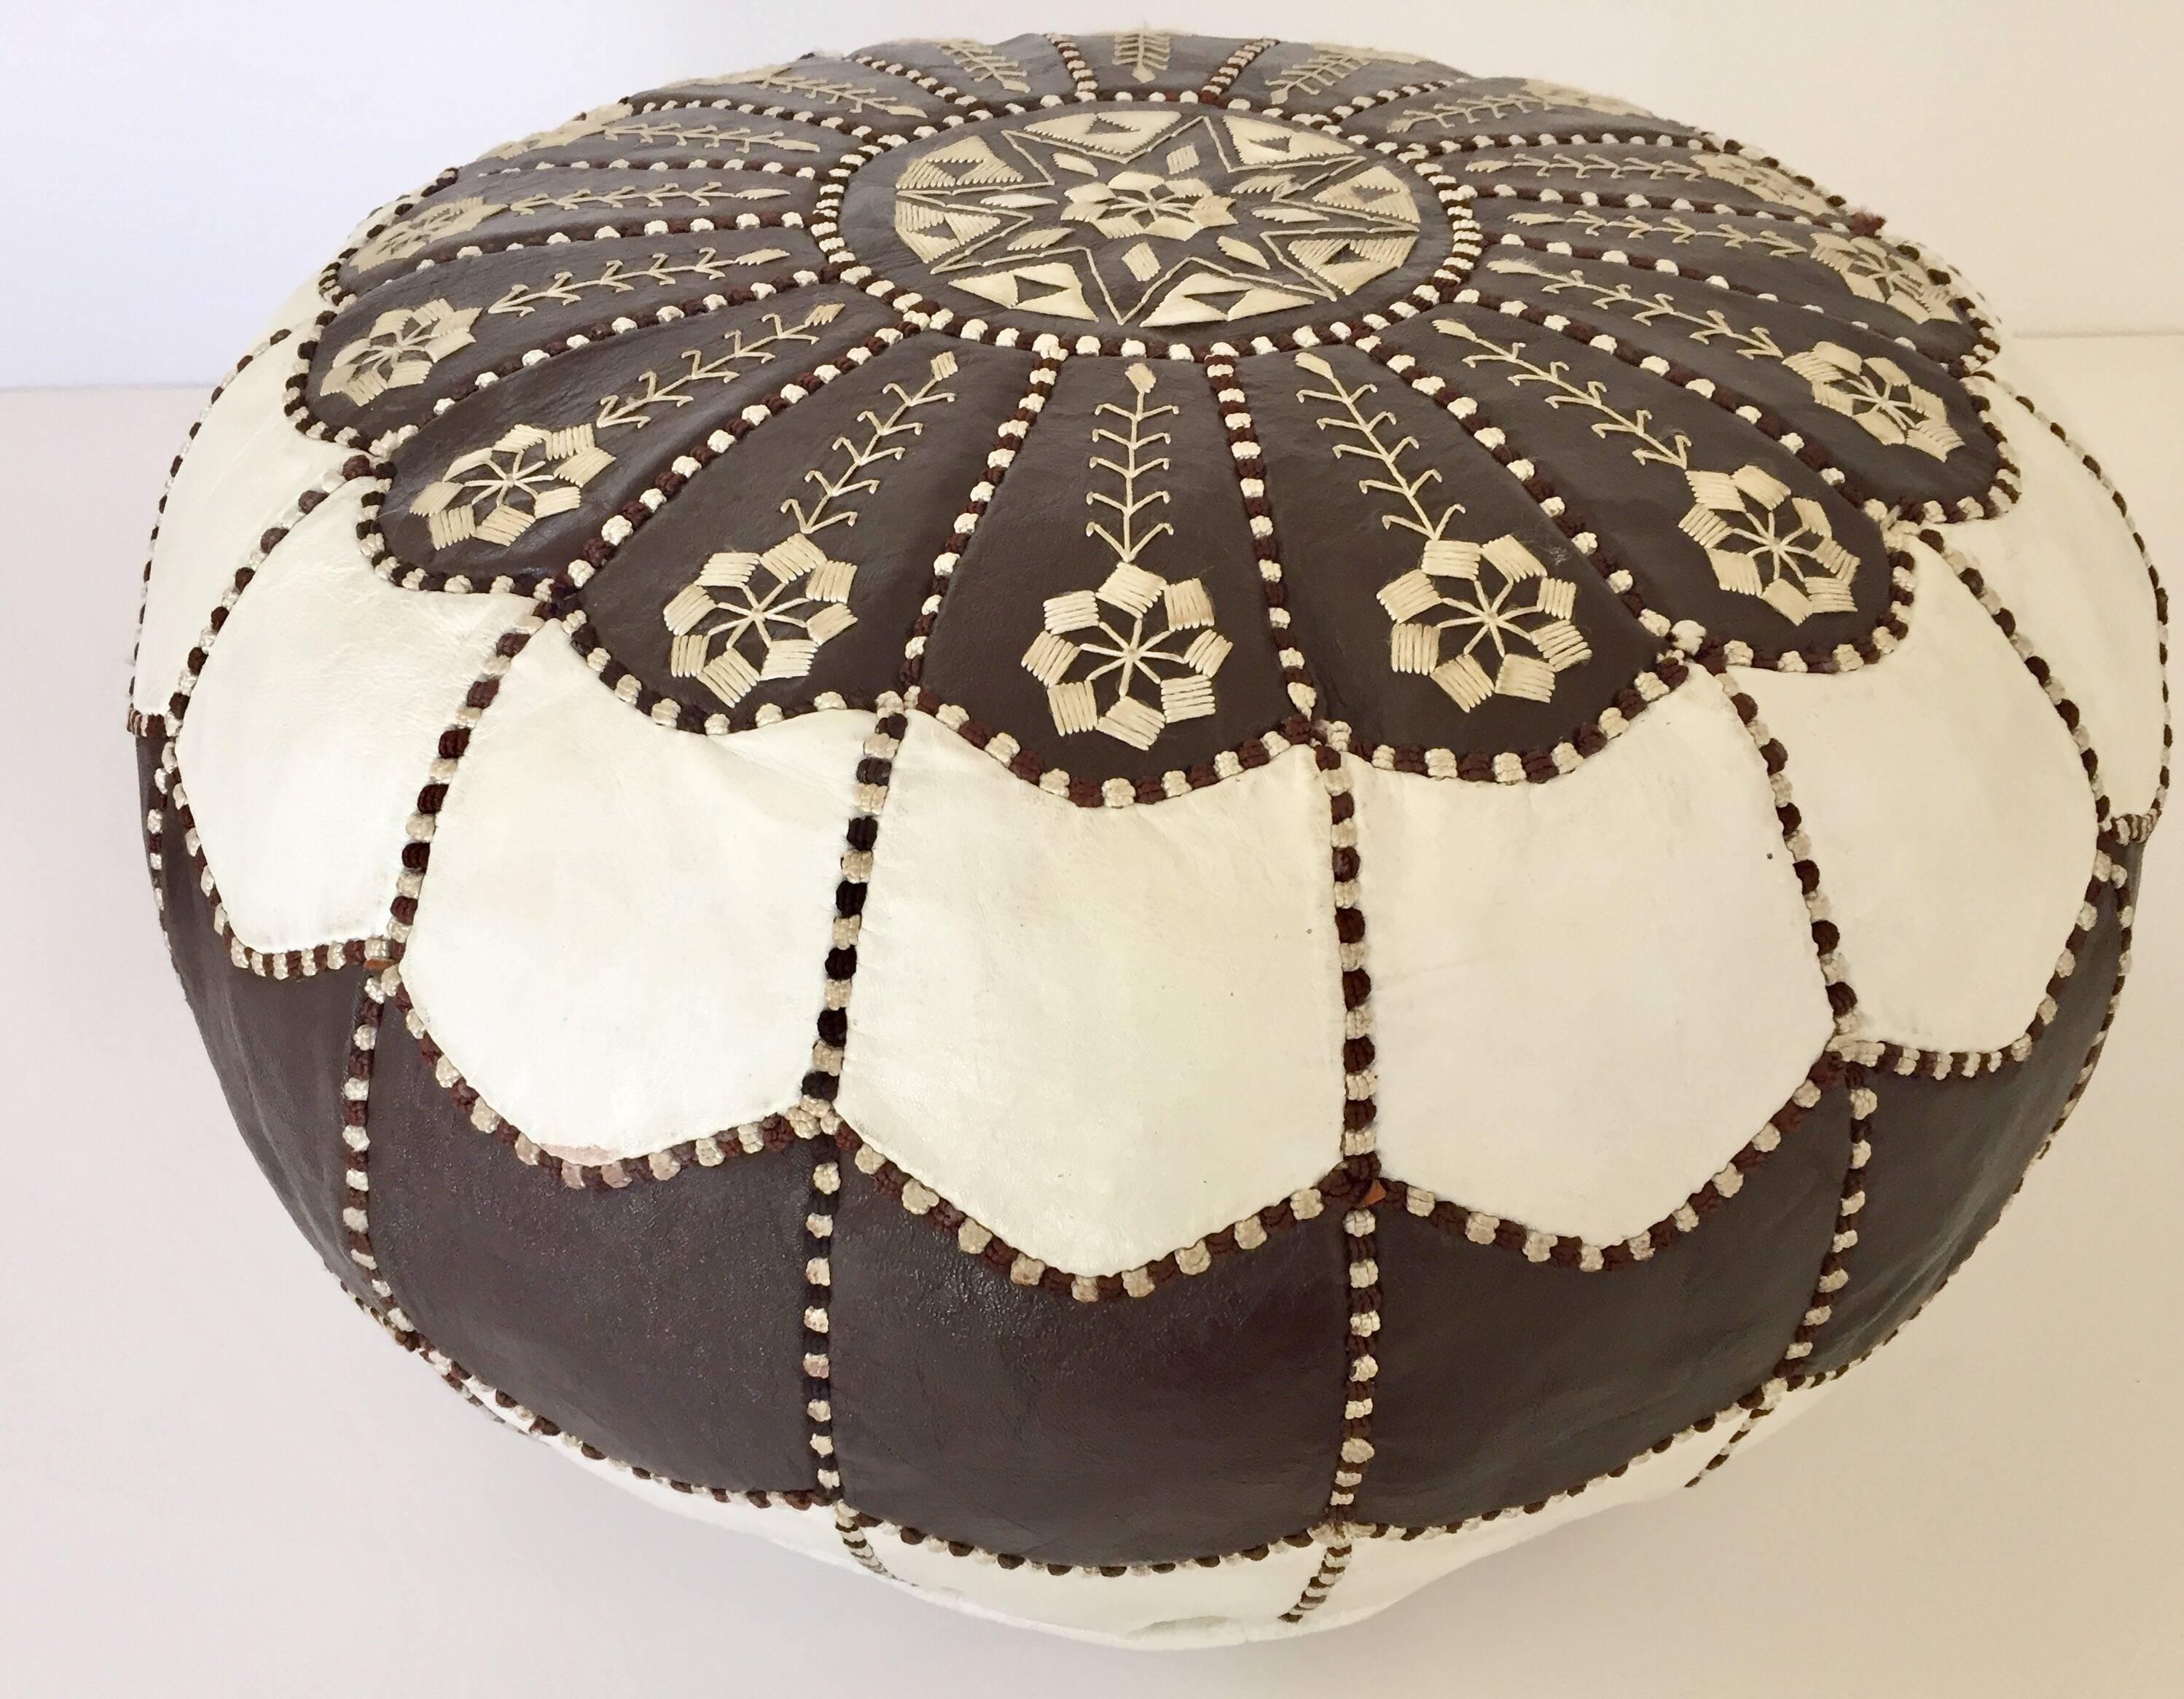 Moroccan Vintage Round Leather Pouf Brown and White Embroidered 1